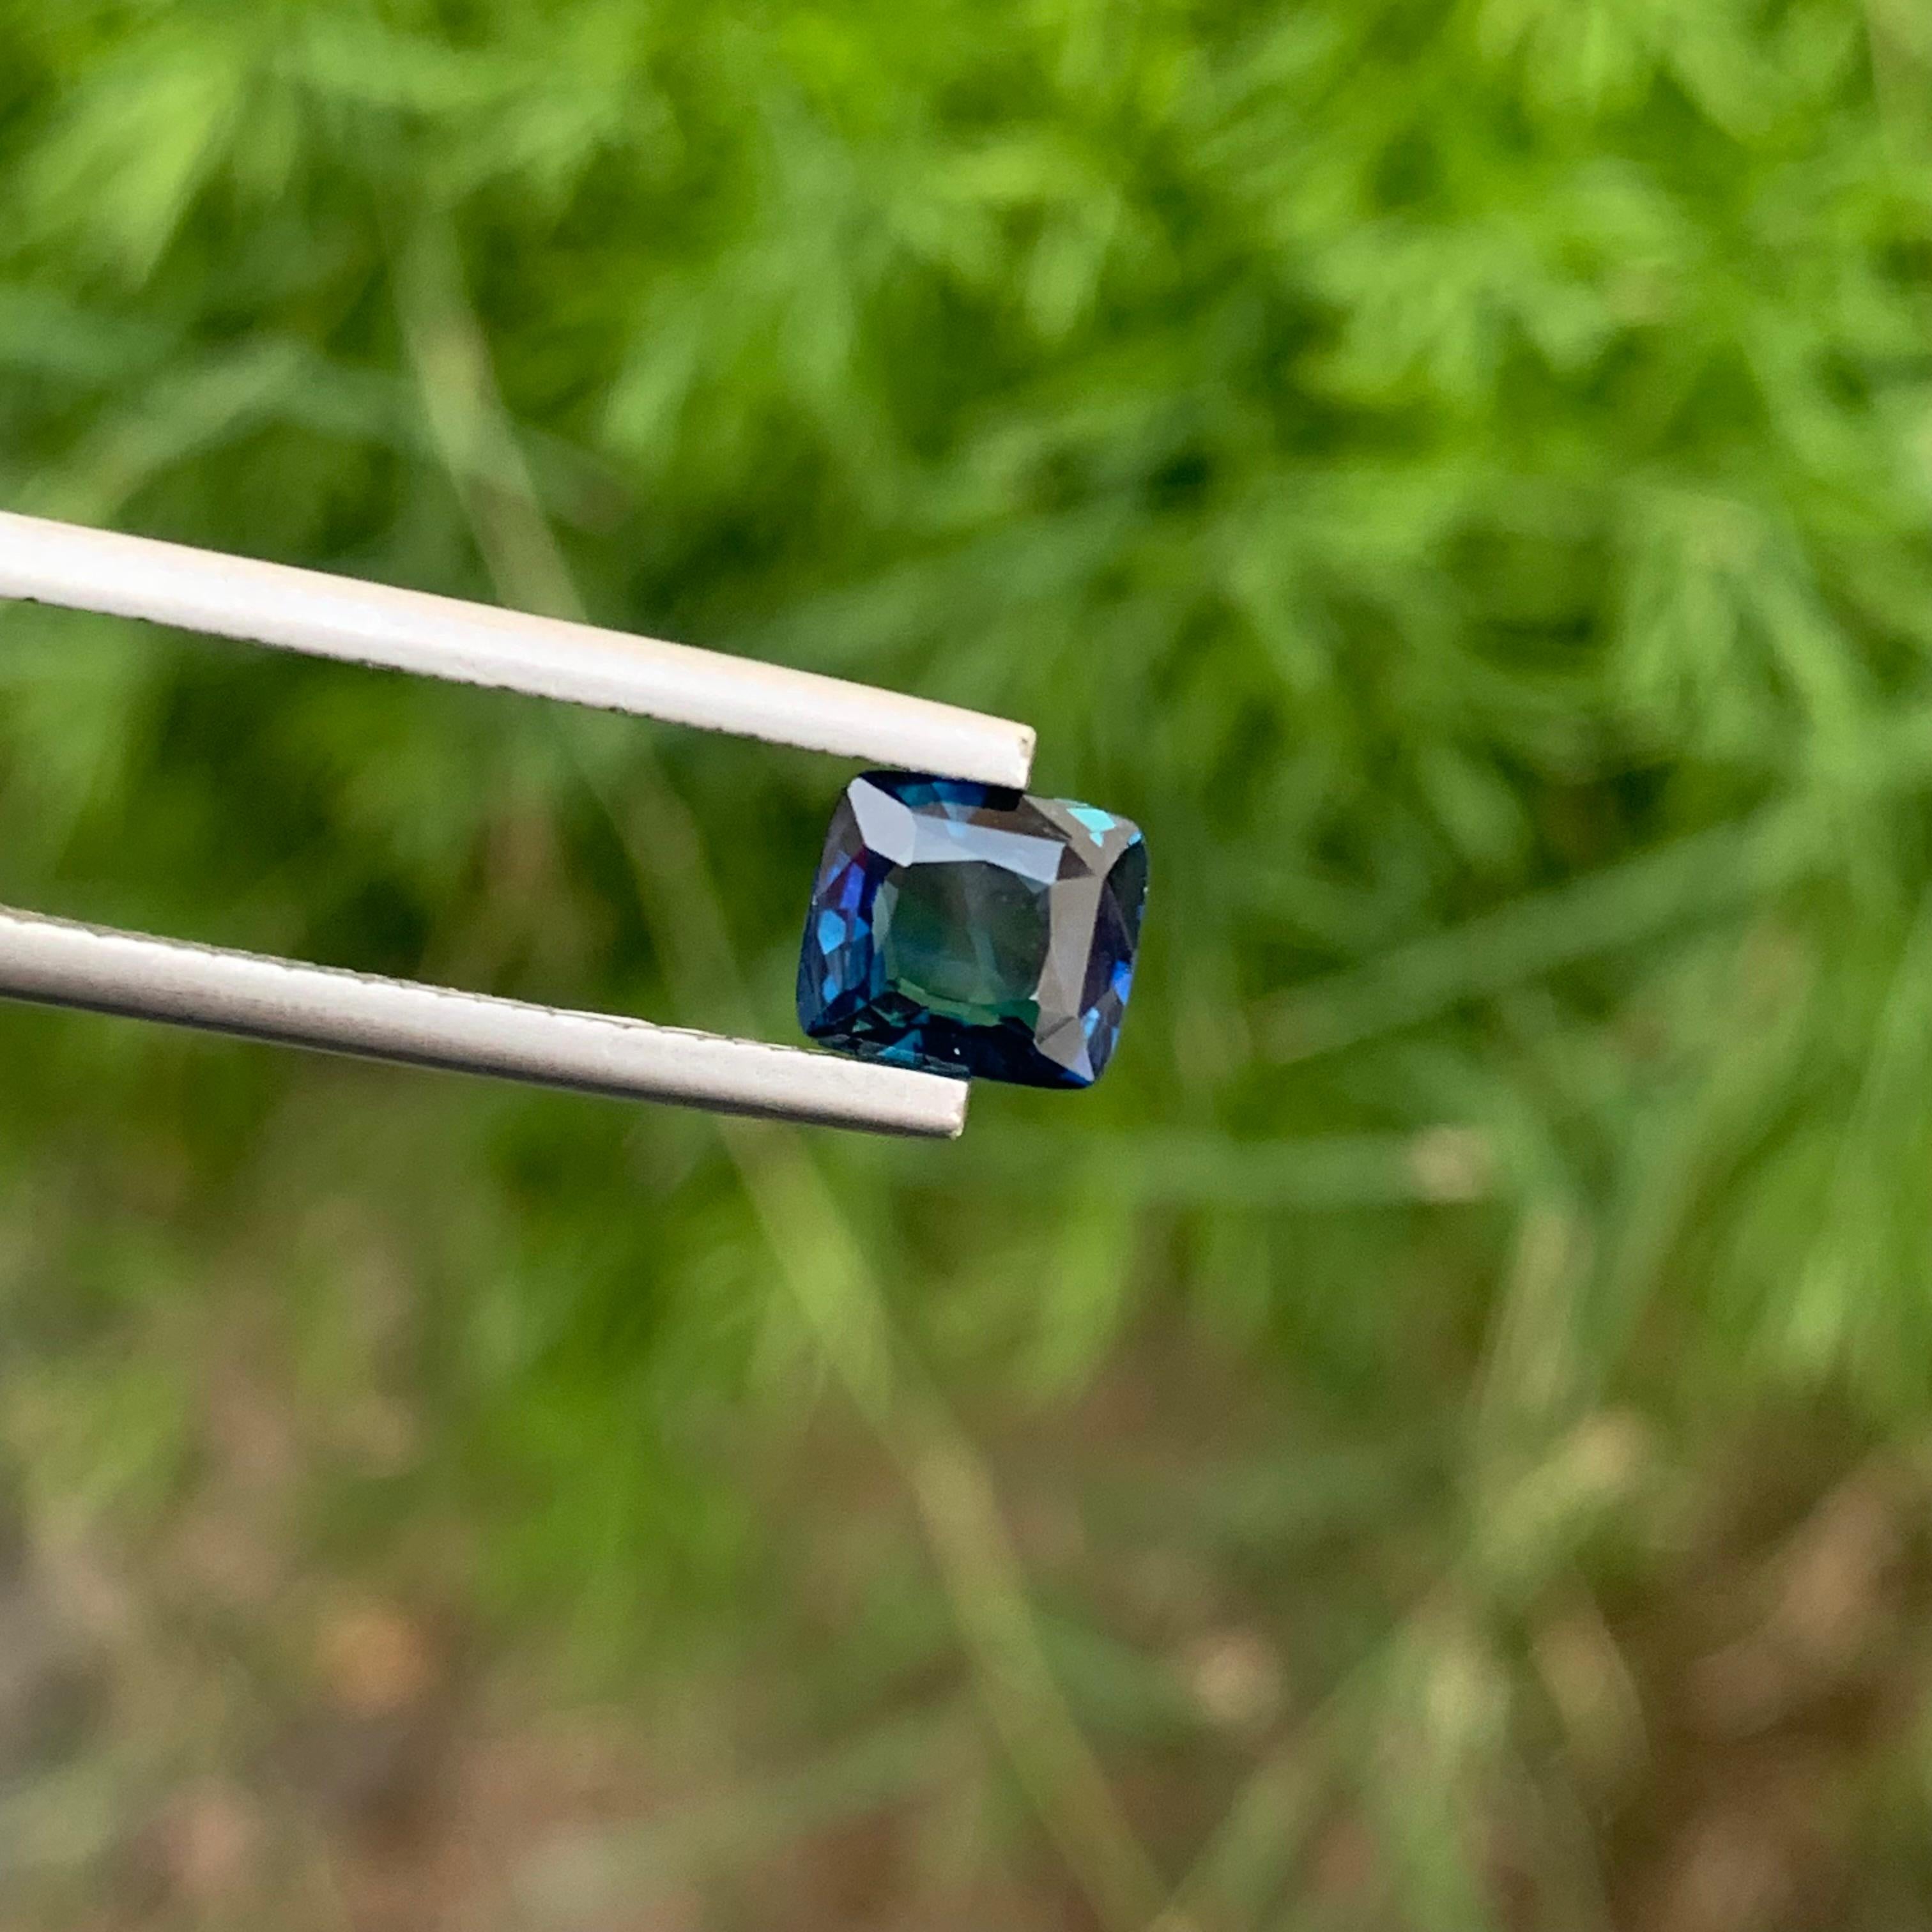 Loose Sapphire 
Weight: 1.65 Carats 
Dimension: 6.9x6.6x3.6 Mm
Origin: Madagascar Africa 
Shape: Cushion
Color: Blue
Treatment: Non
Certificate; On Demand
Blue sapphire, with its mesmerizing deep blue hue, is one of the most iconic and cherished